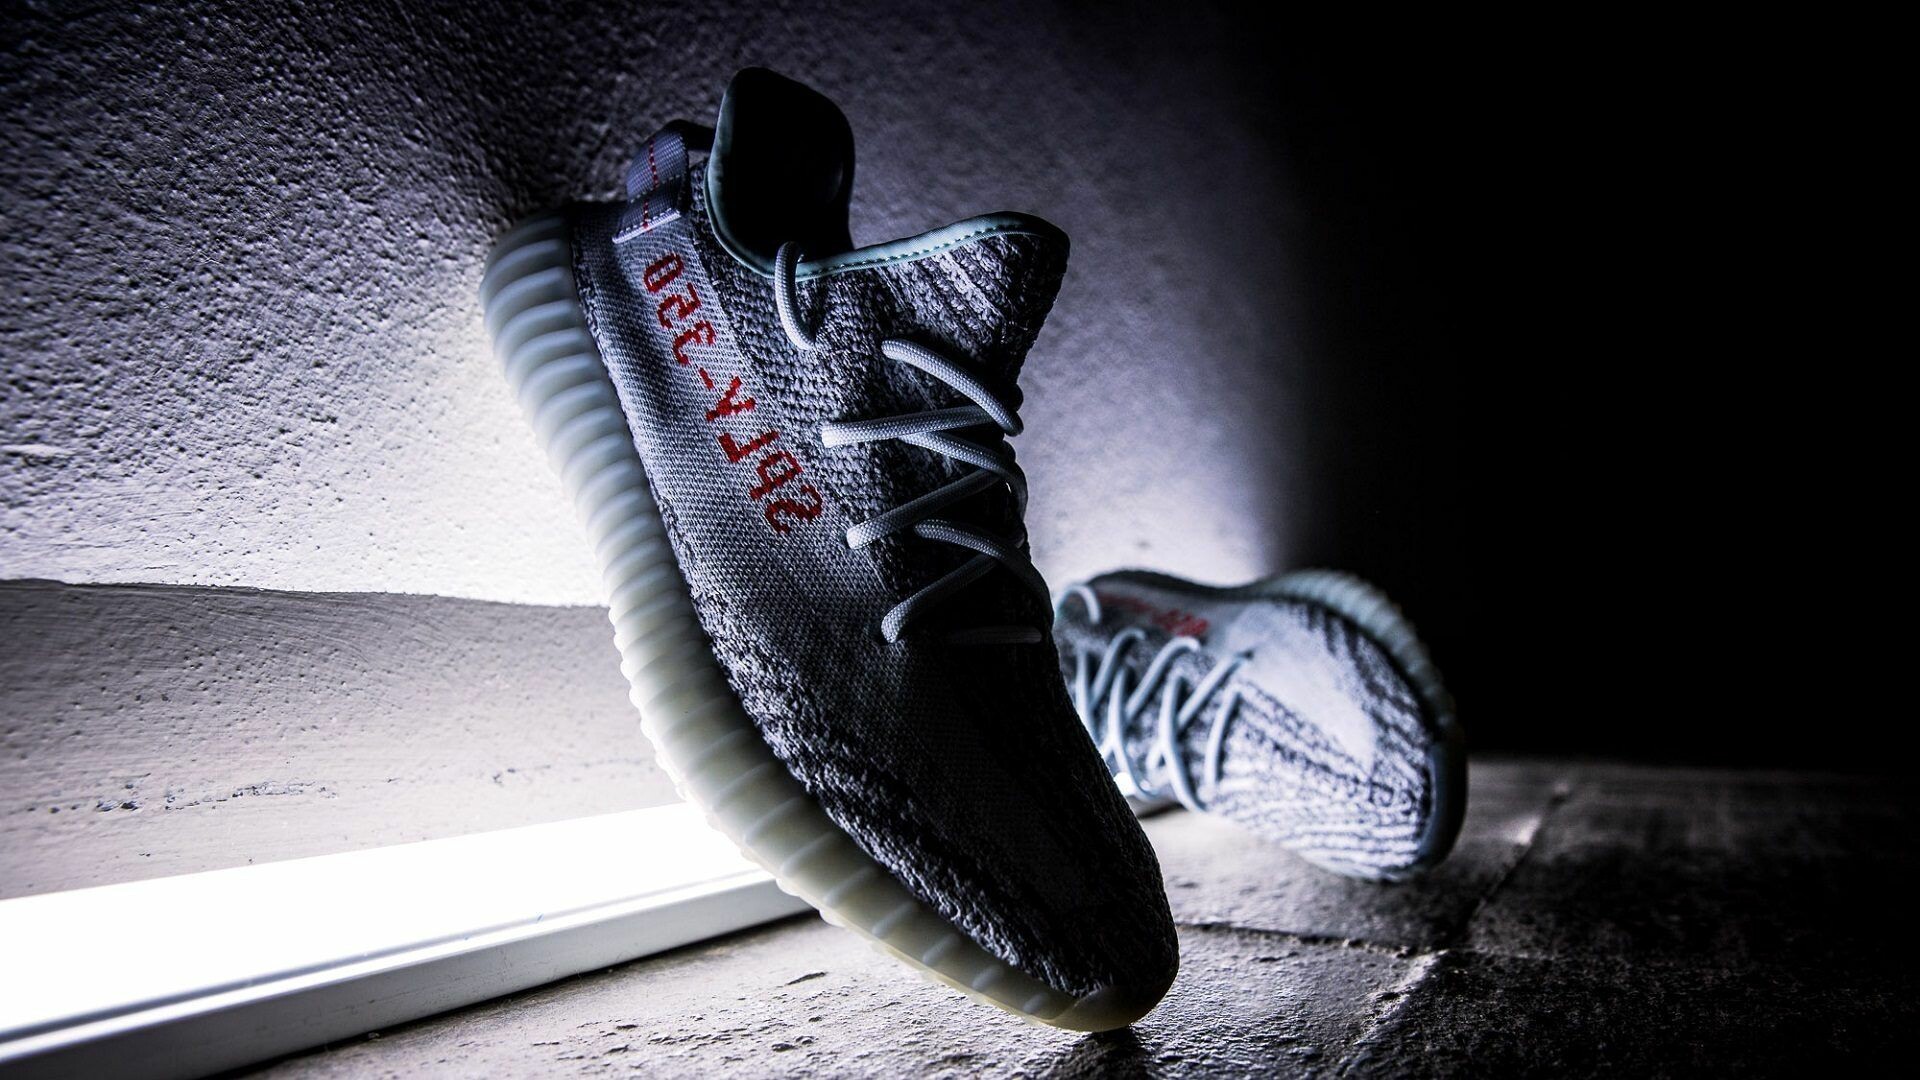 Yeezy: The first Adidas Boost 380 was released in December 2019. 1920x1080 Full HD Background.